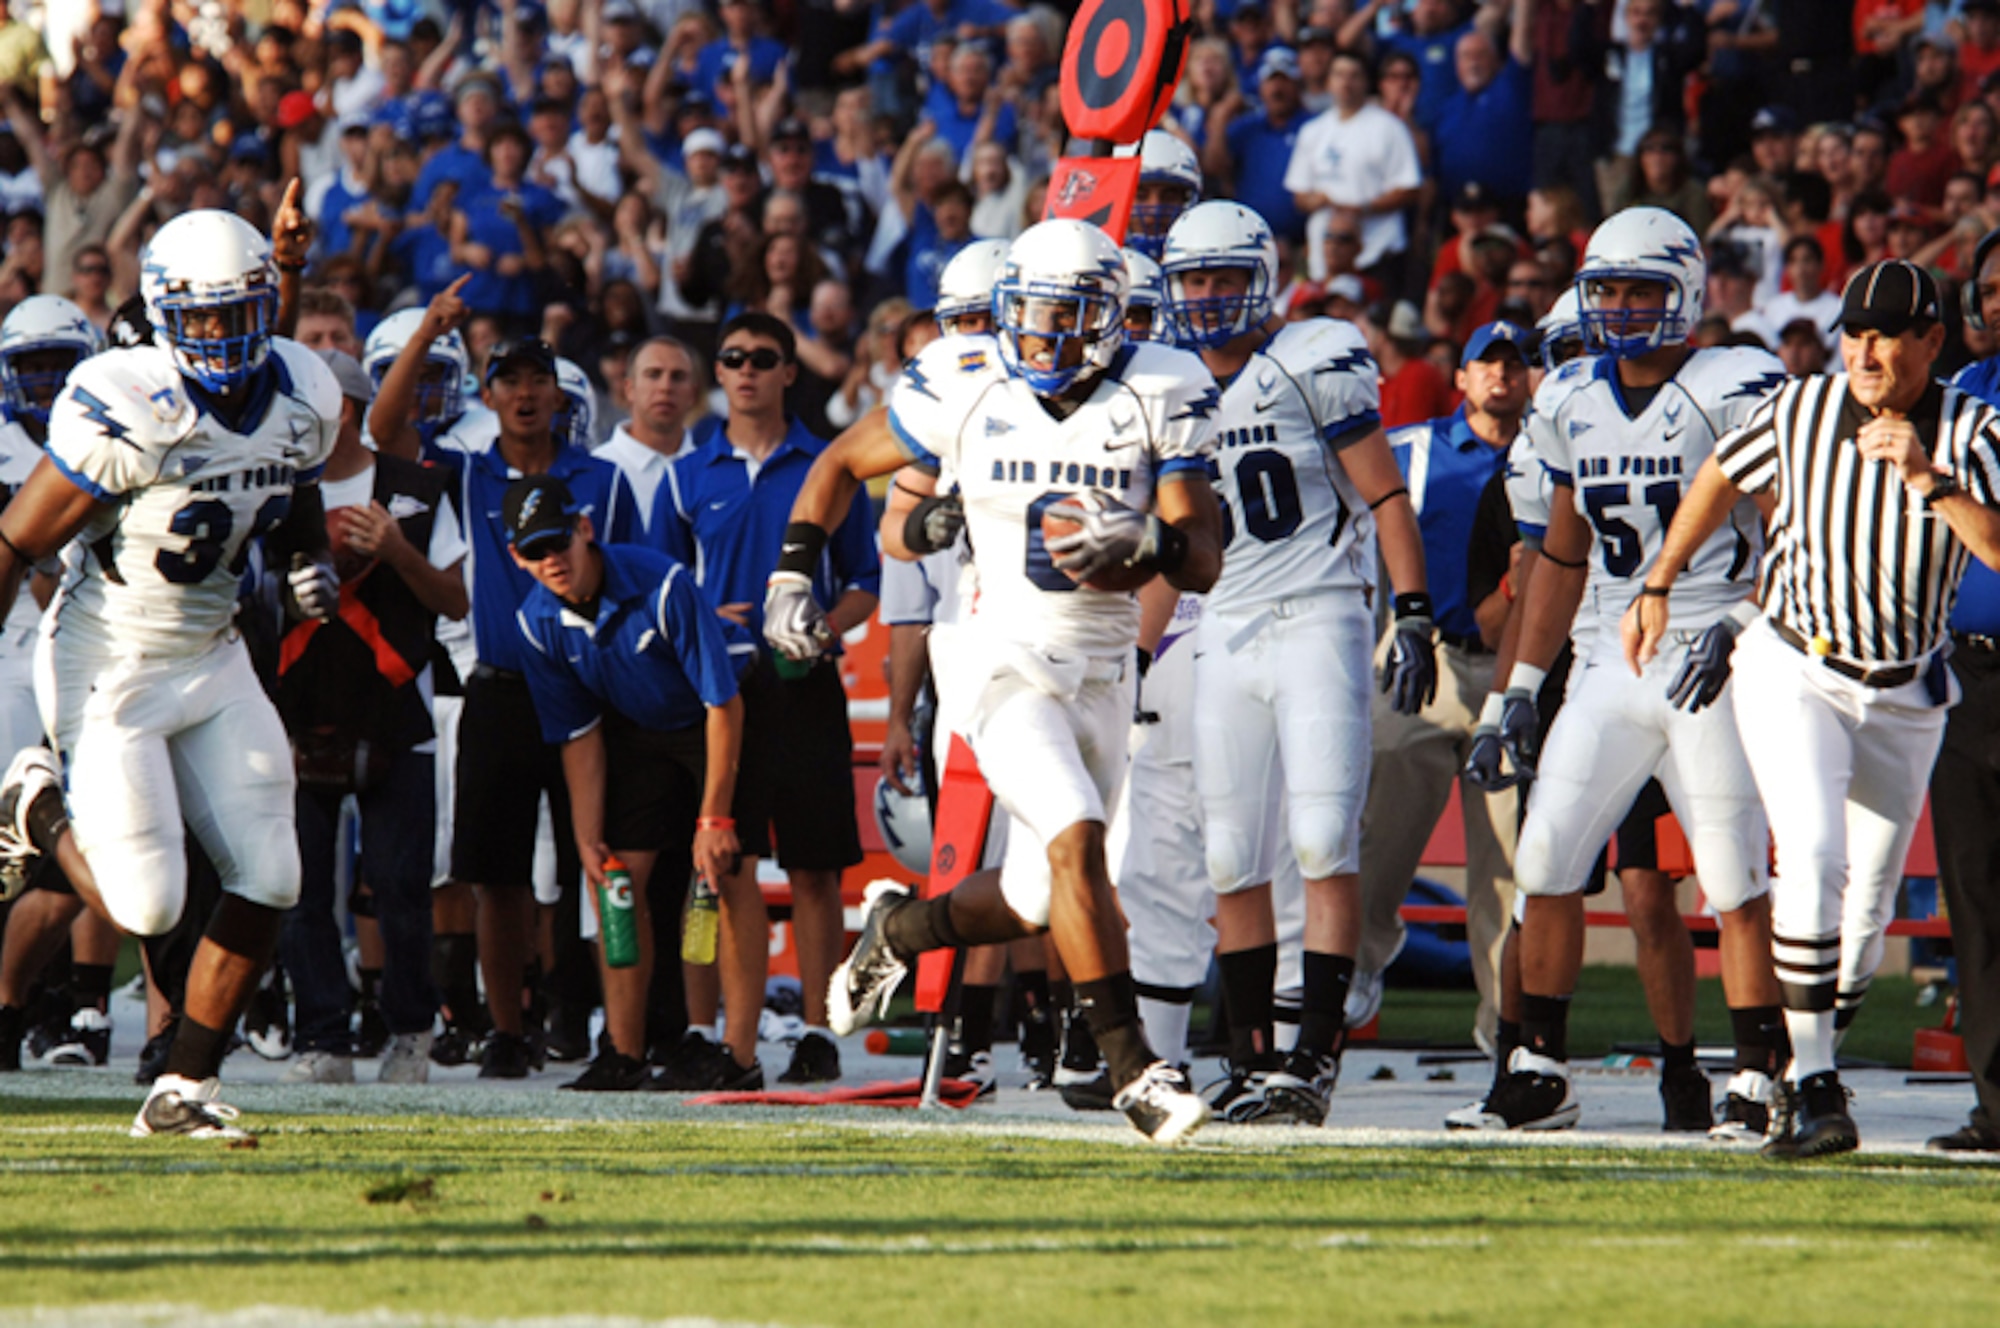 U.S. Air Force Academy defensive back Jon Davis races down the sidelines on his way to a 38-yard score on an interception return during football action Sept. 19, 2009, at Albuquerque, N.M. (U.S. Air Force photo/John Van Winkle) 